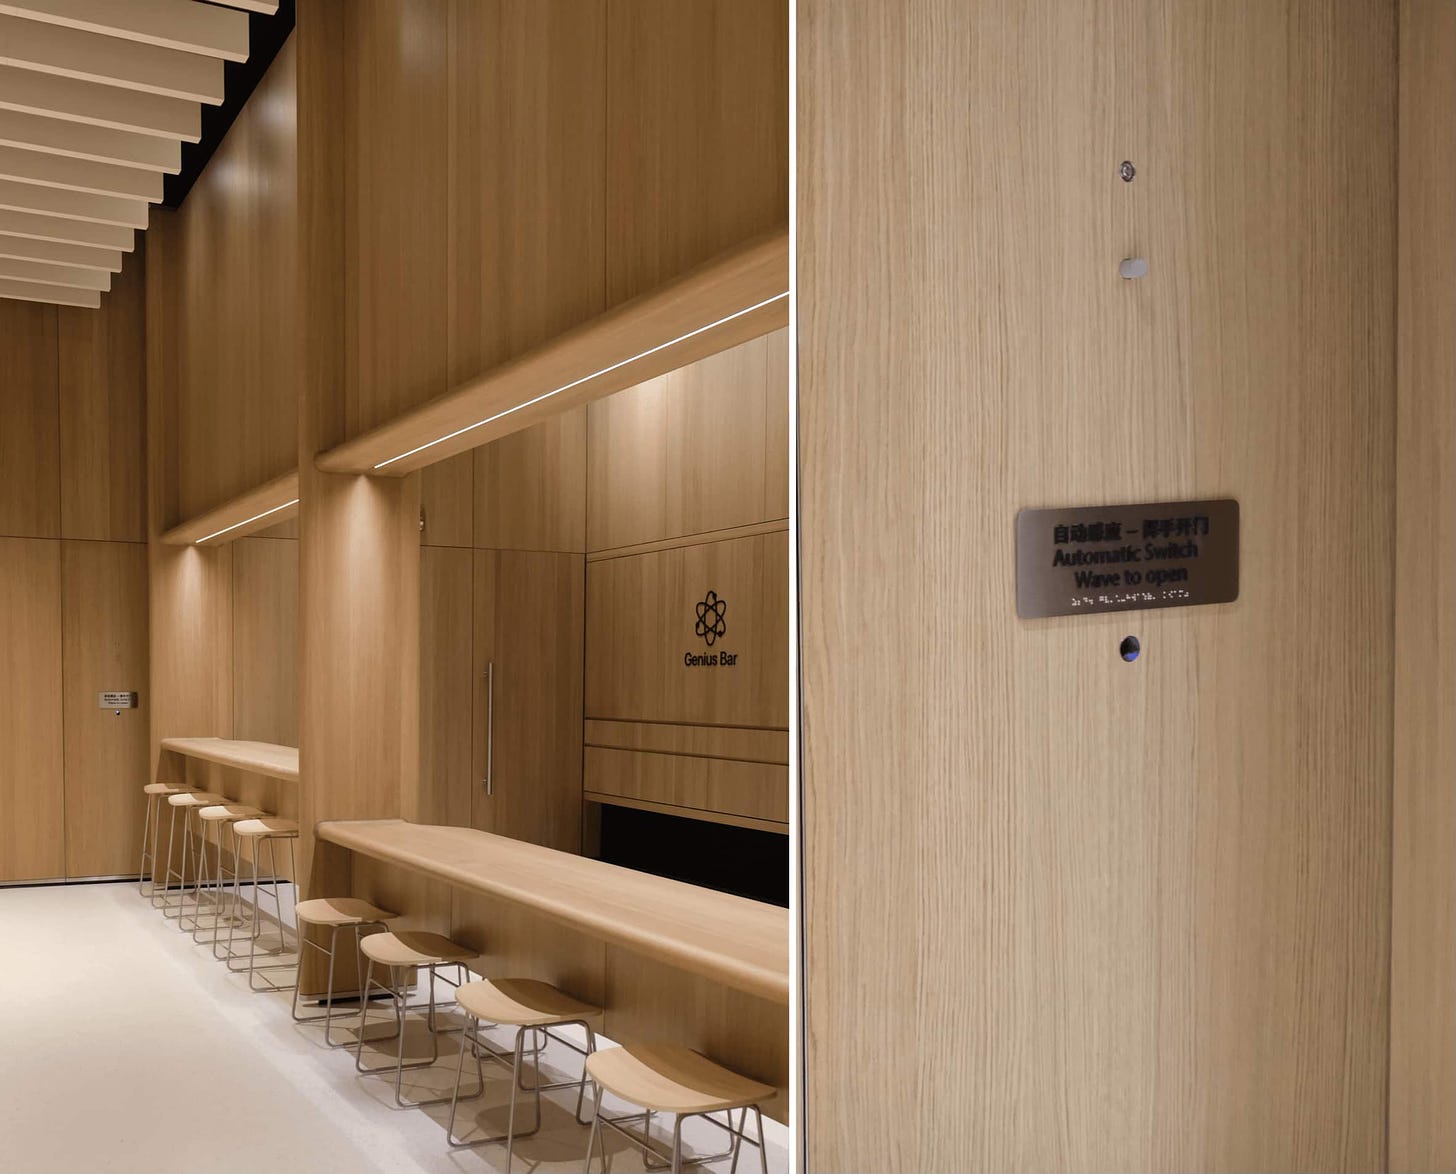 A collage showing the Genius Bar and an automatic switch sign at Apple MixC Wenzhou. The walls are made of wood.